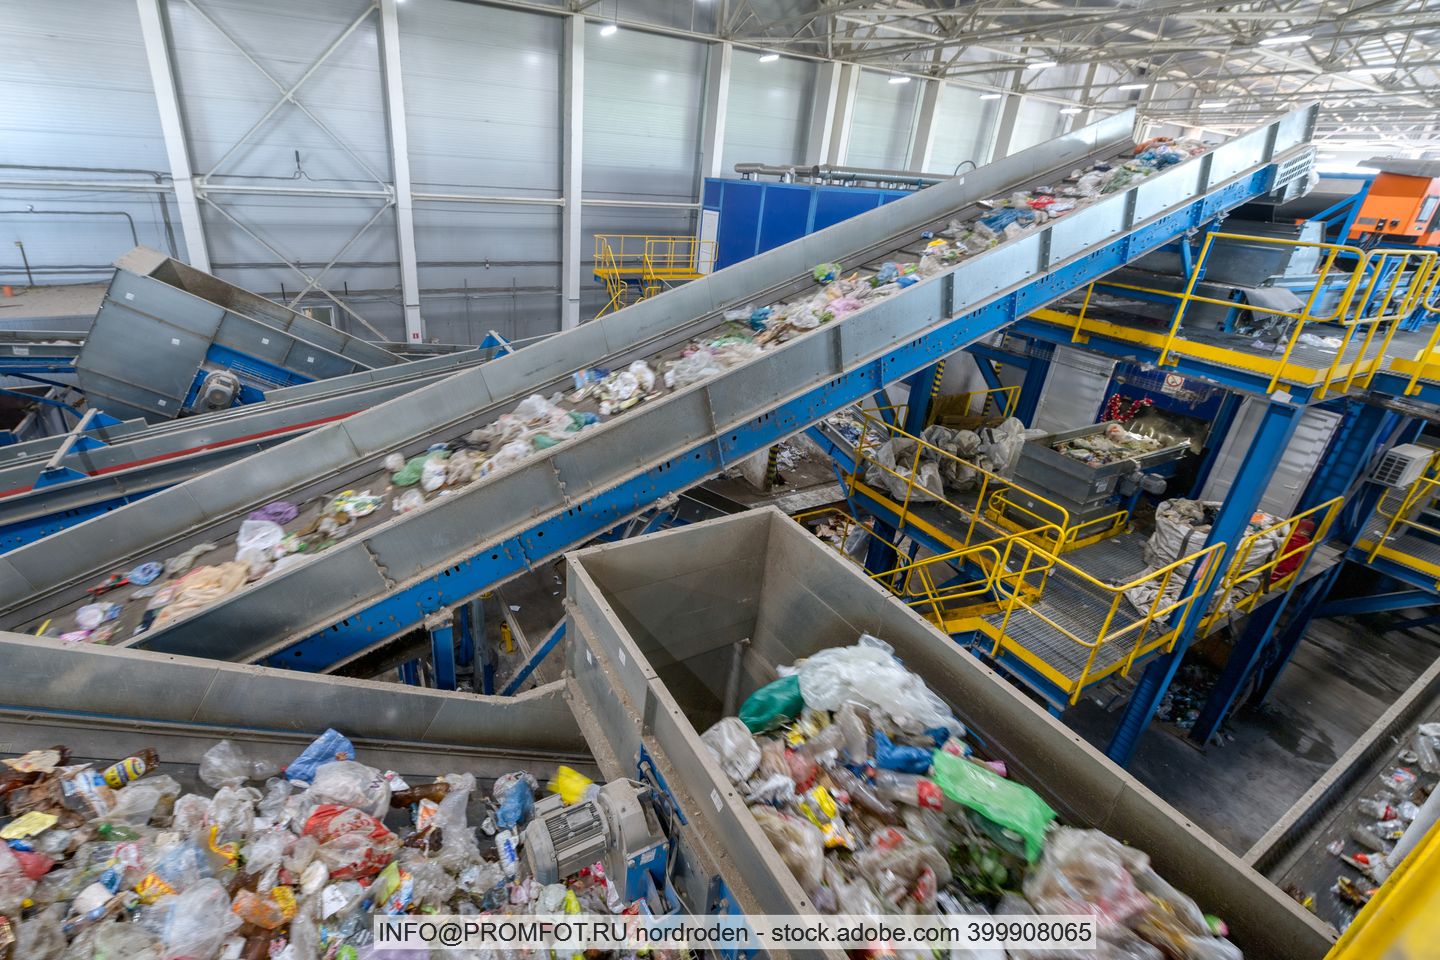 Representative image of a packaging waste sorting plant